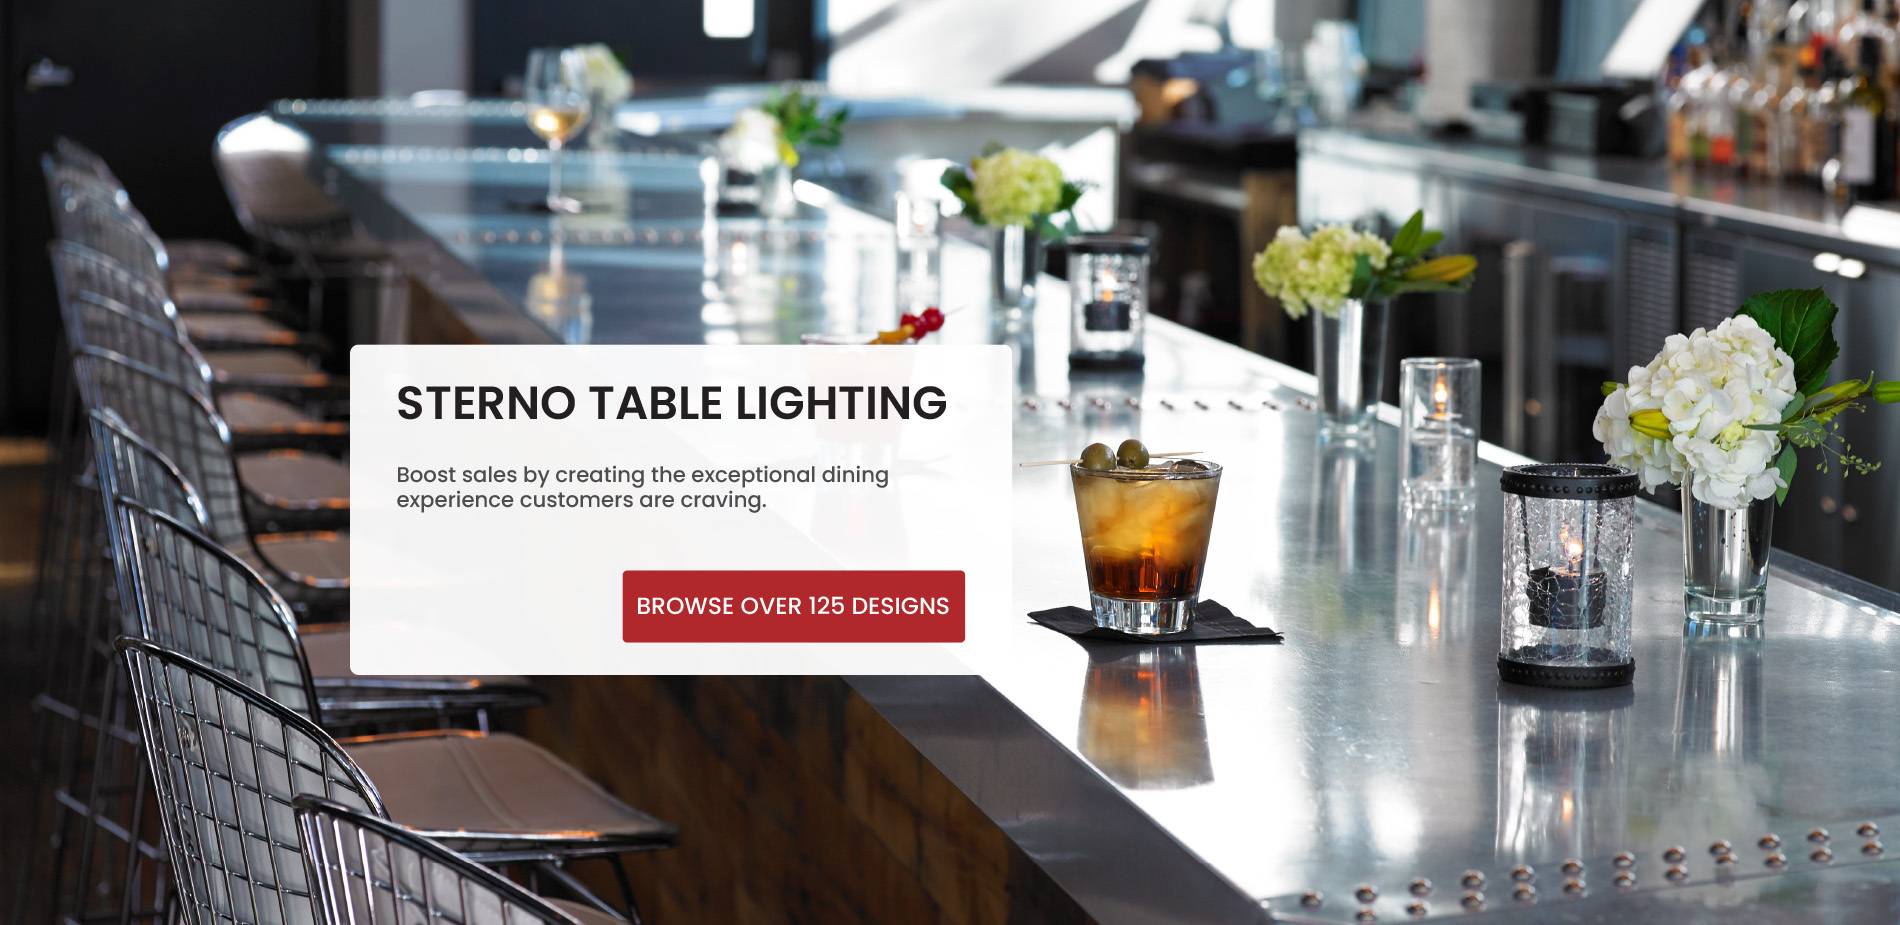 Sterno Table Lighting. Boost sales by creating the exceptional dining experience customers are craving.